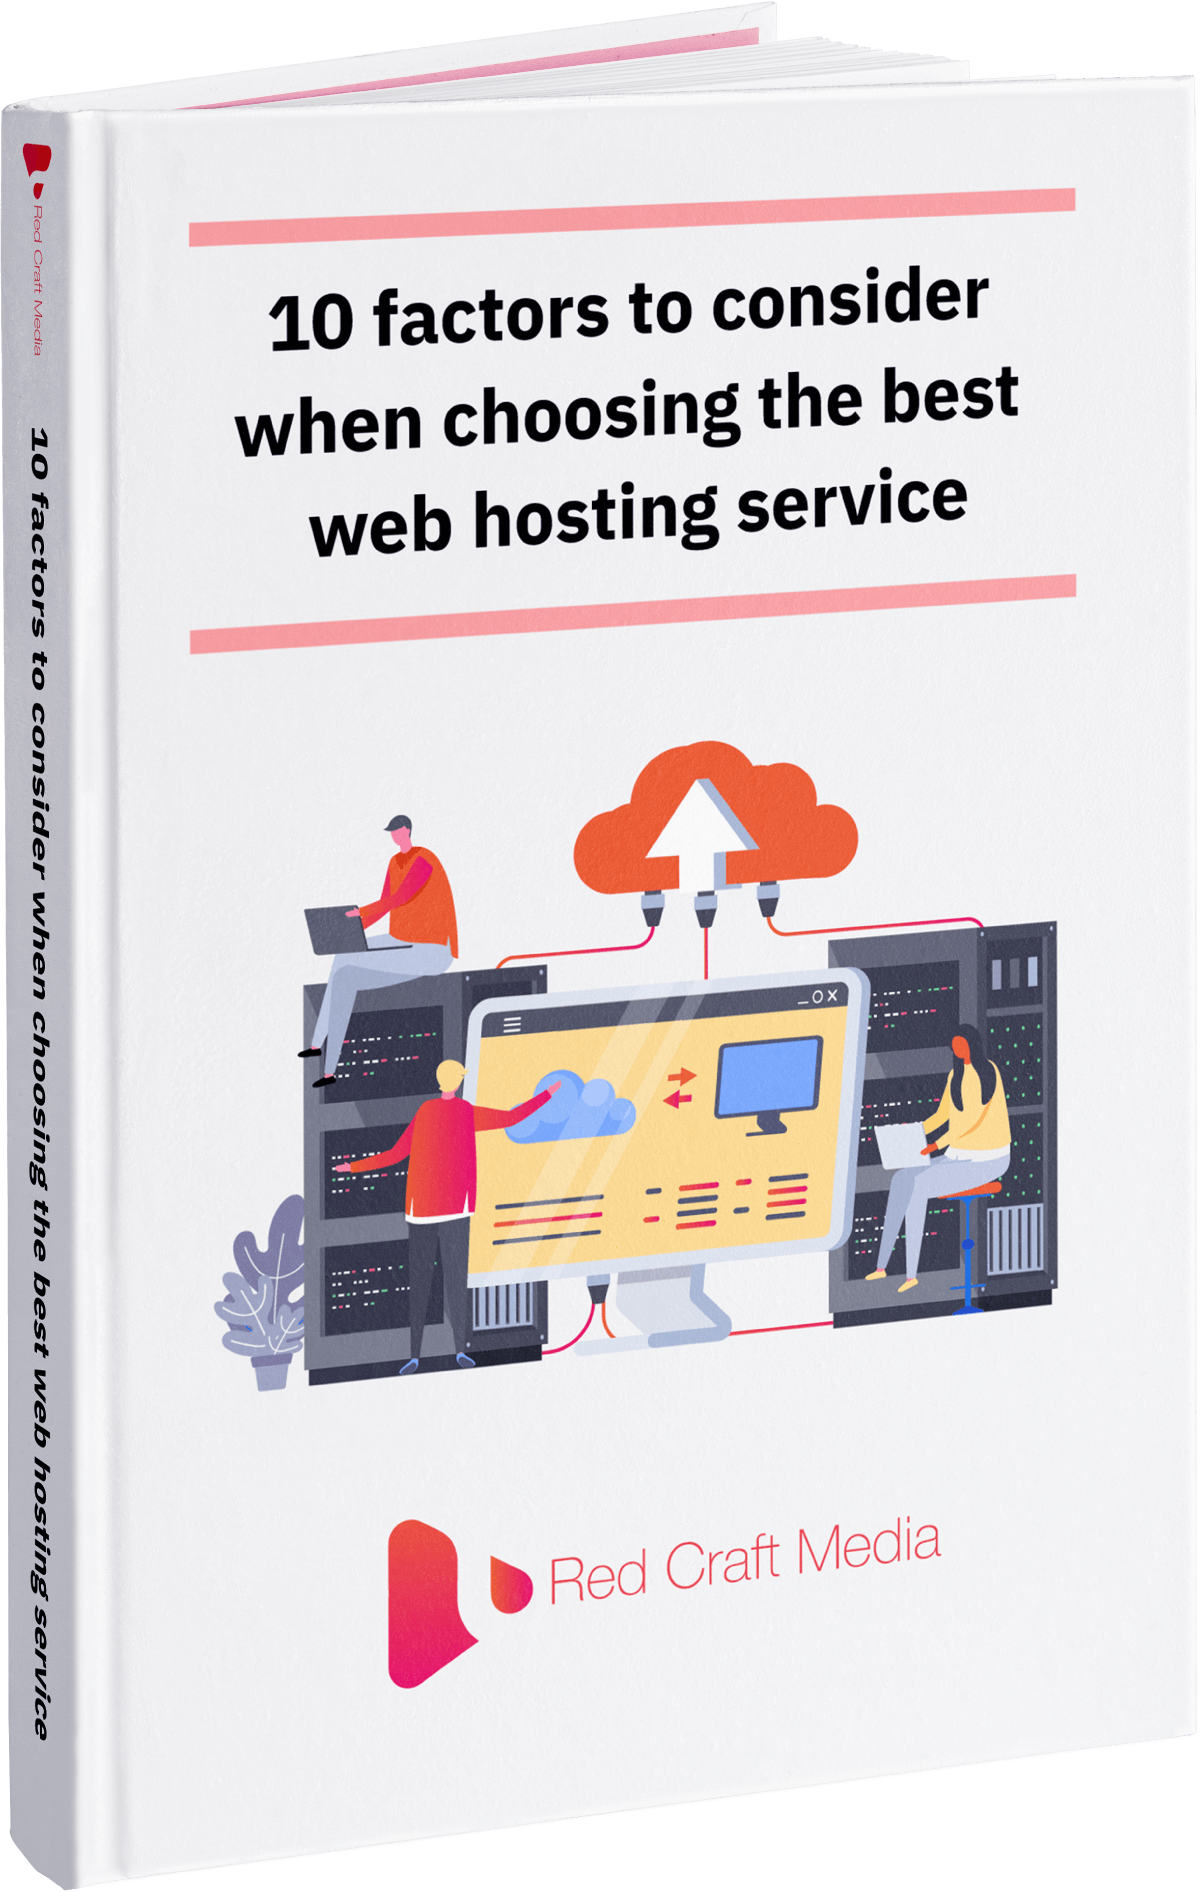 10 factors to consider when choosing the best web hosting service